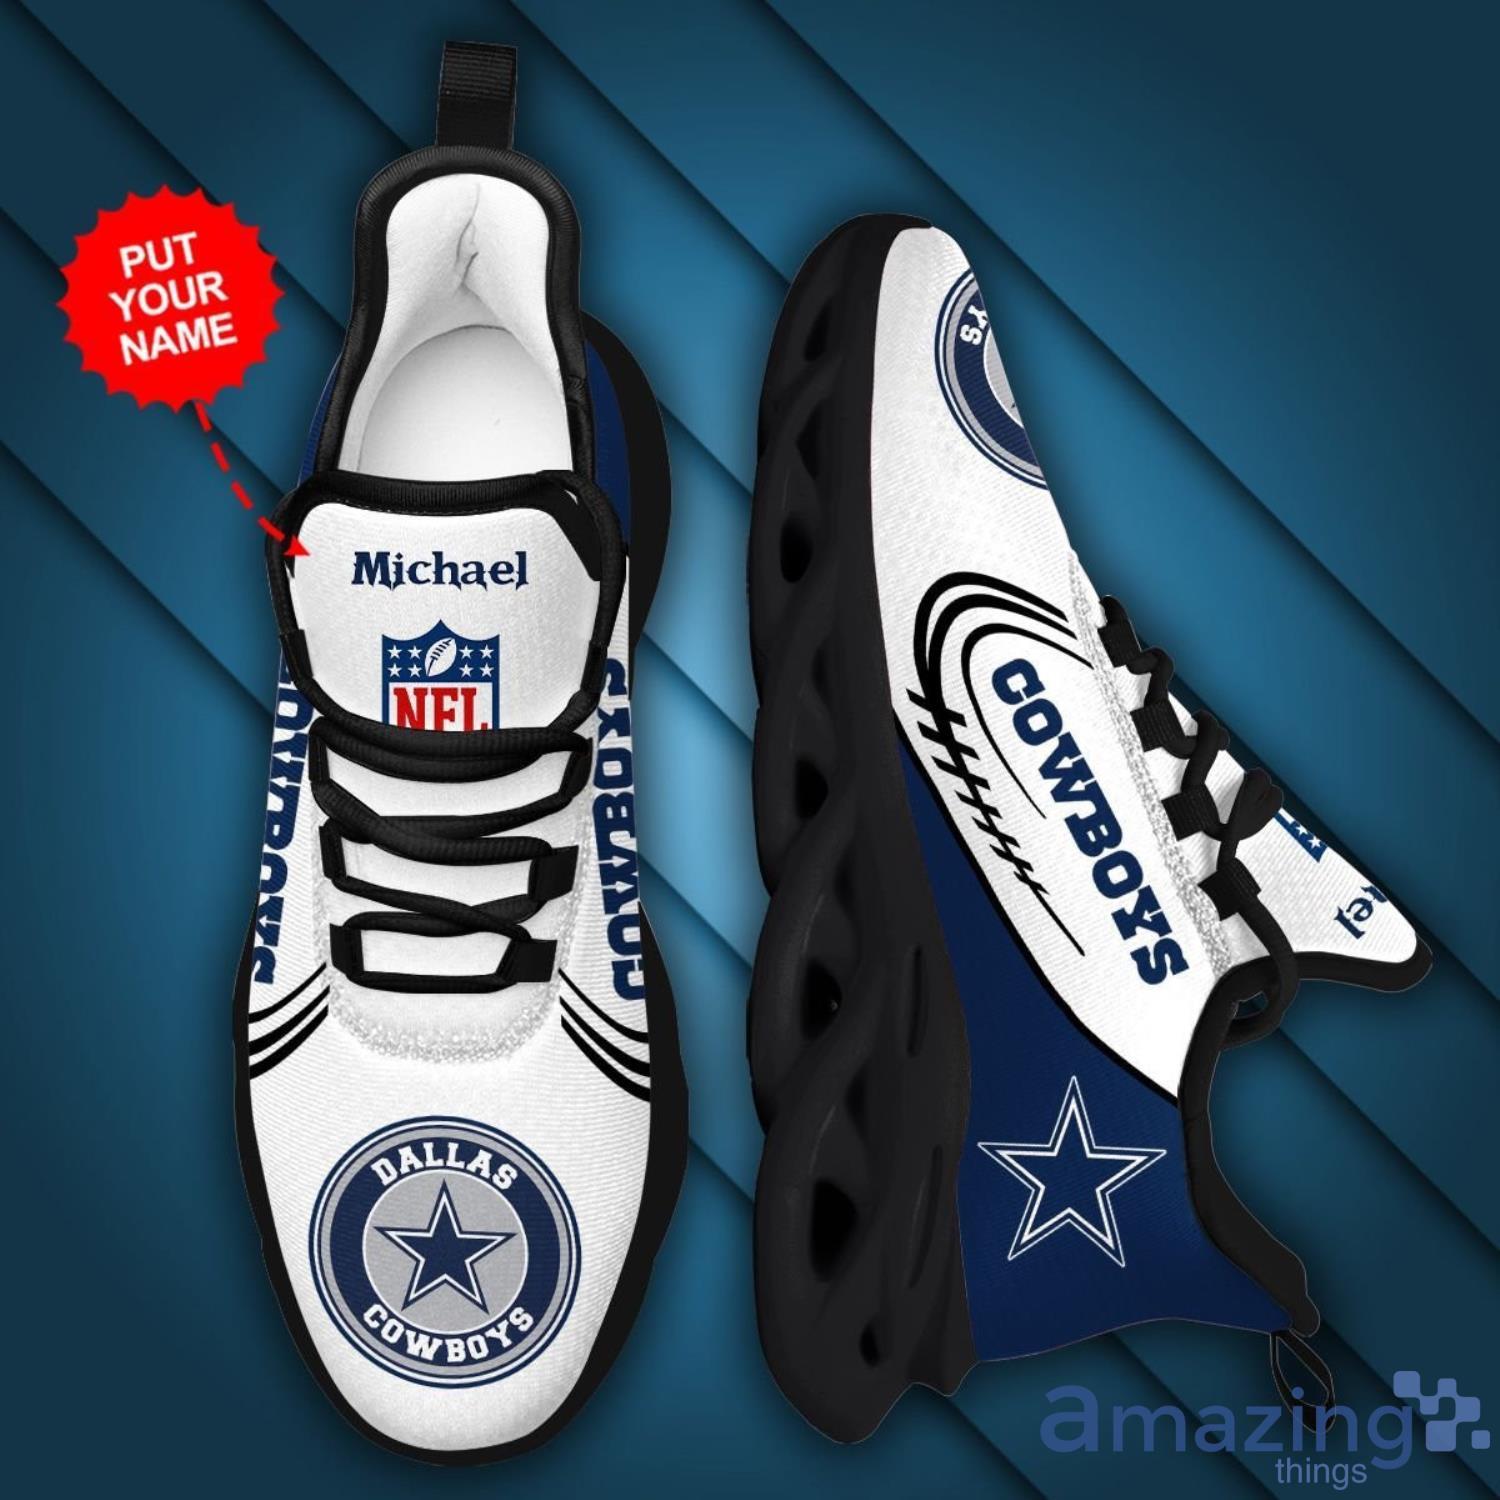 Dallas Cowboys Sneakers Nike Air Max: Show Your Team Spirit in Style